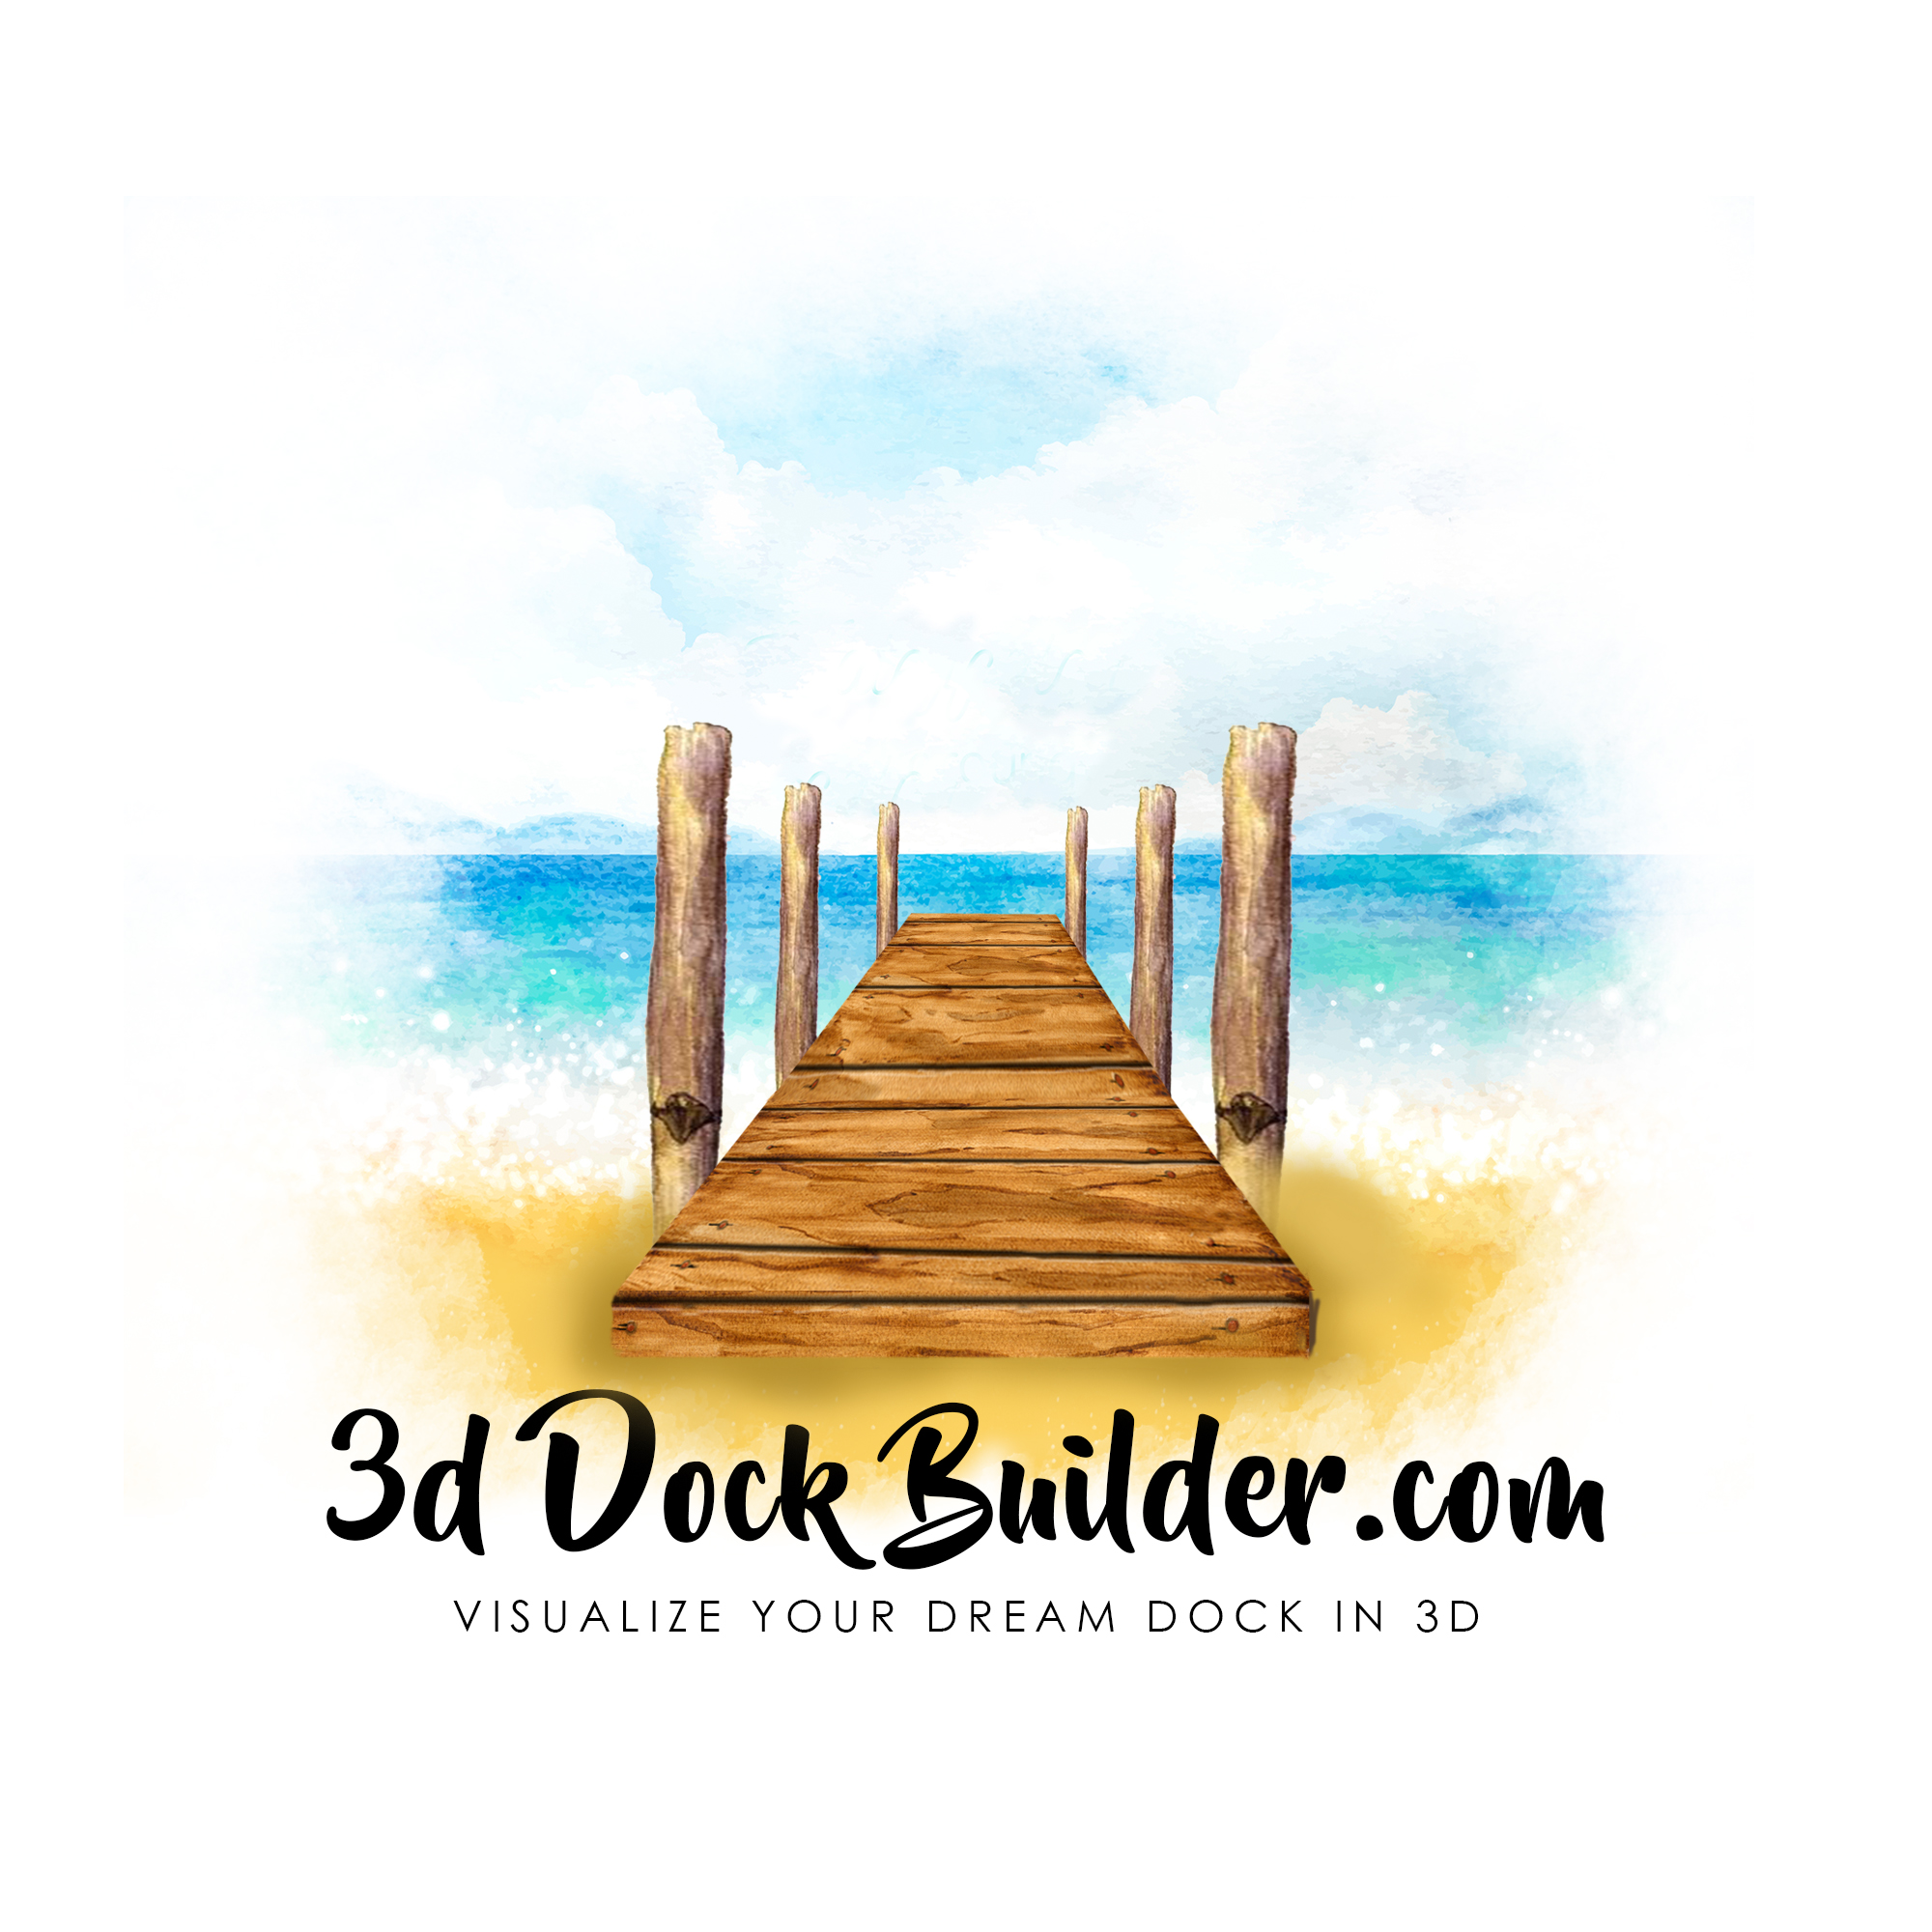 3D Dock Builder takes buying a dock to a new level with the web based dock configurator